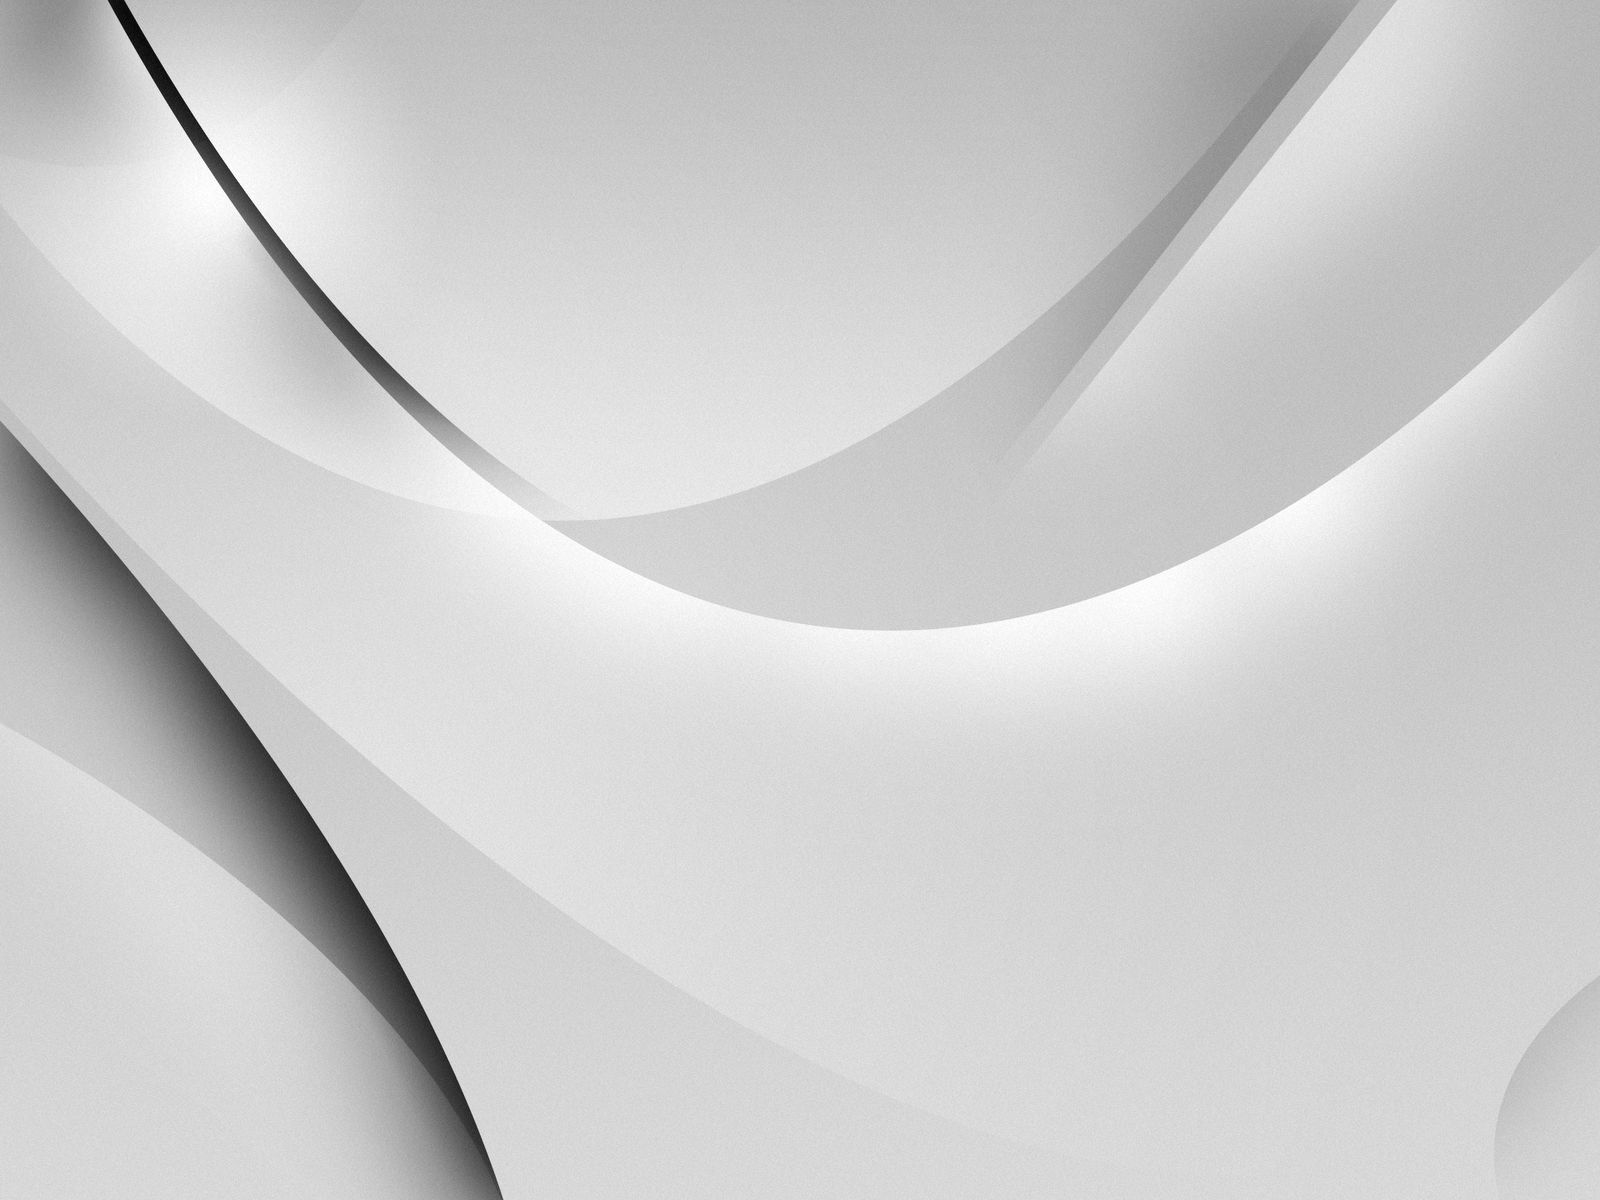 white abstract wallpaper. Black and White Wallpaper